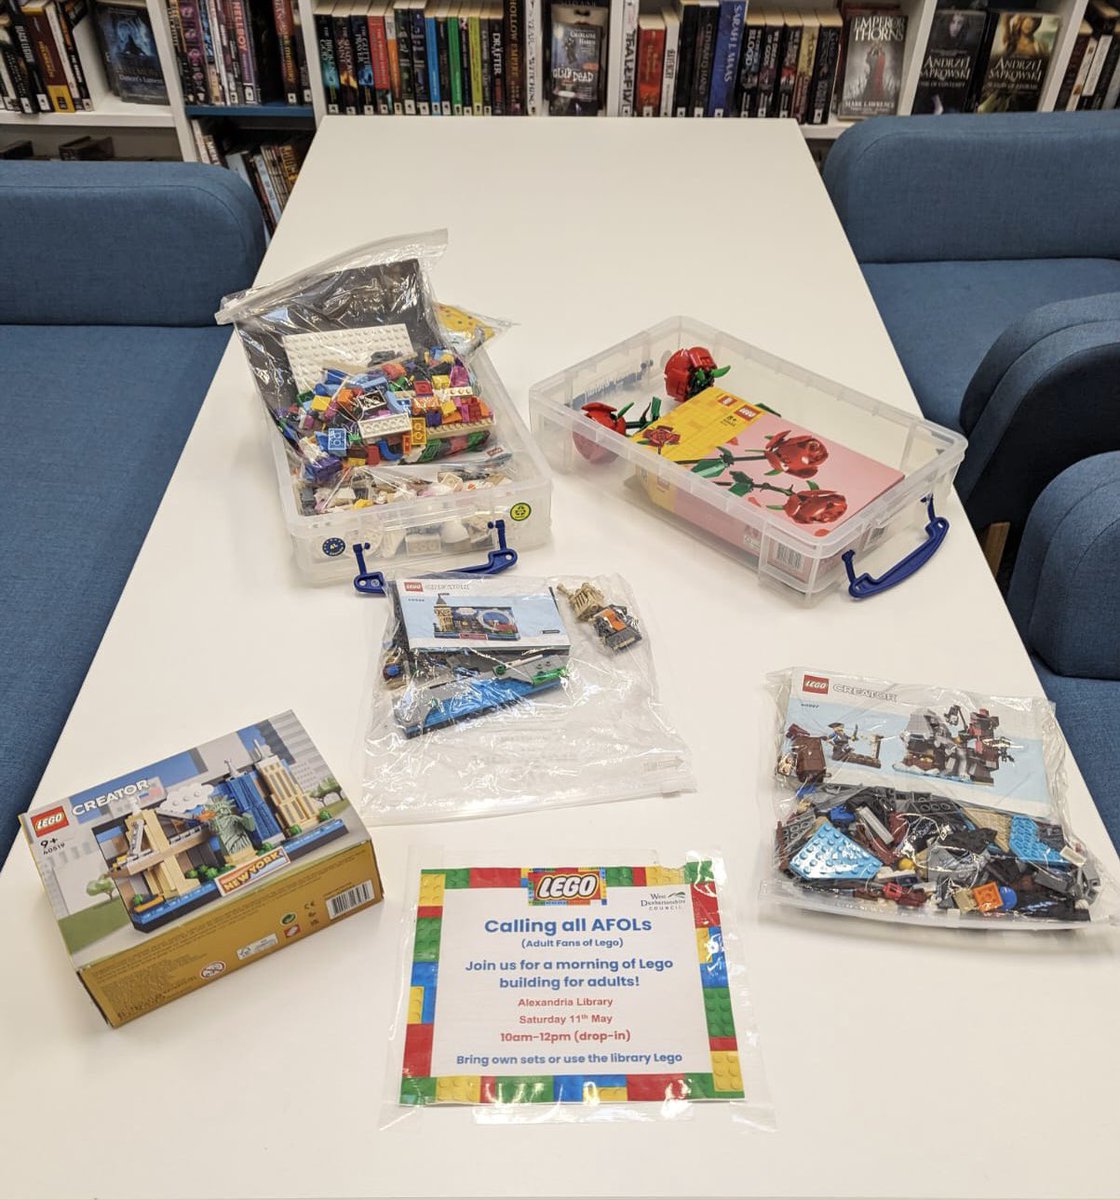 Getting ready for our Adult Fans of Lego session at #Alexandria library this morning 🙌 10am-12pm, drop-in, no need to book. Use your own sets or use the library’s Lego. Bring a friend or come along and make new ones. We can’t wait to see you 😊